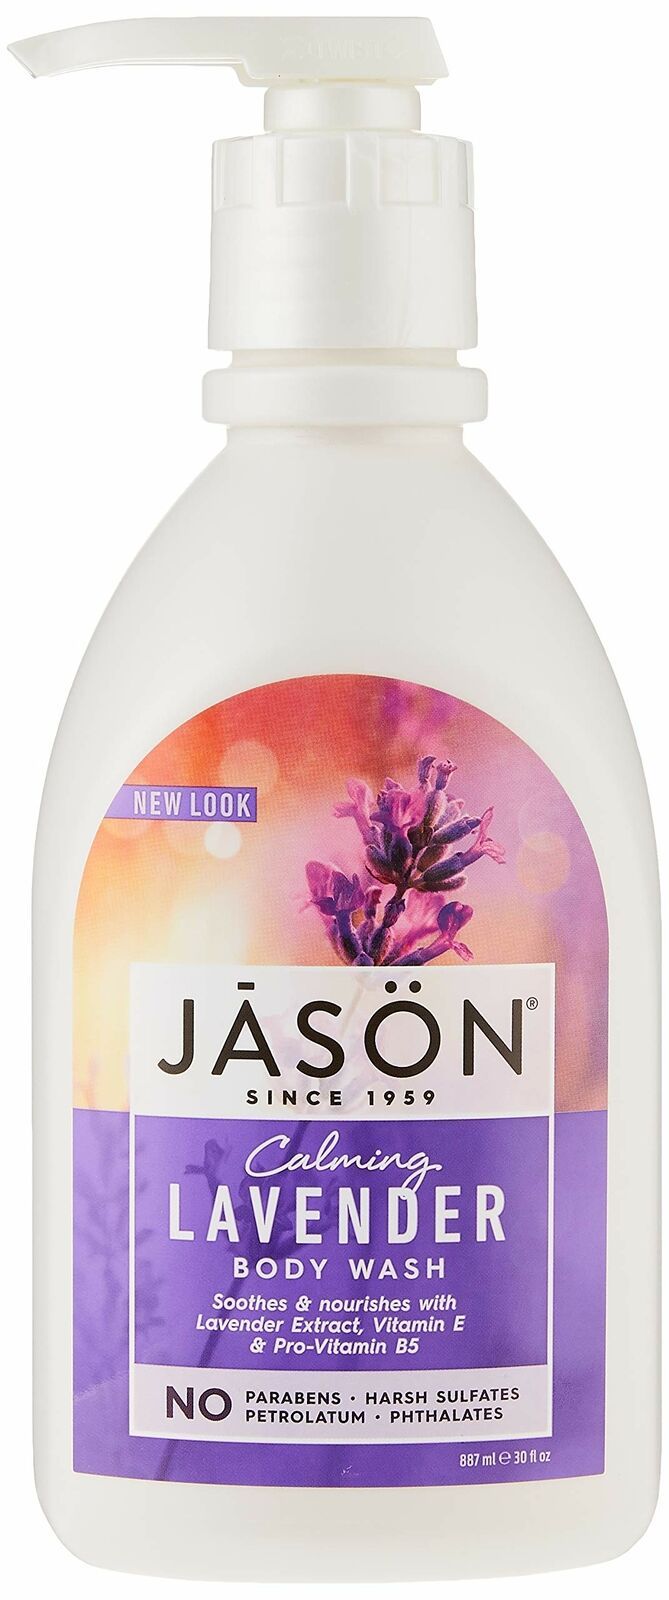 Primary image for Jason Natural Body Wash and Shower Gel, Calming Lavender 30 oz